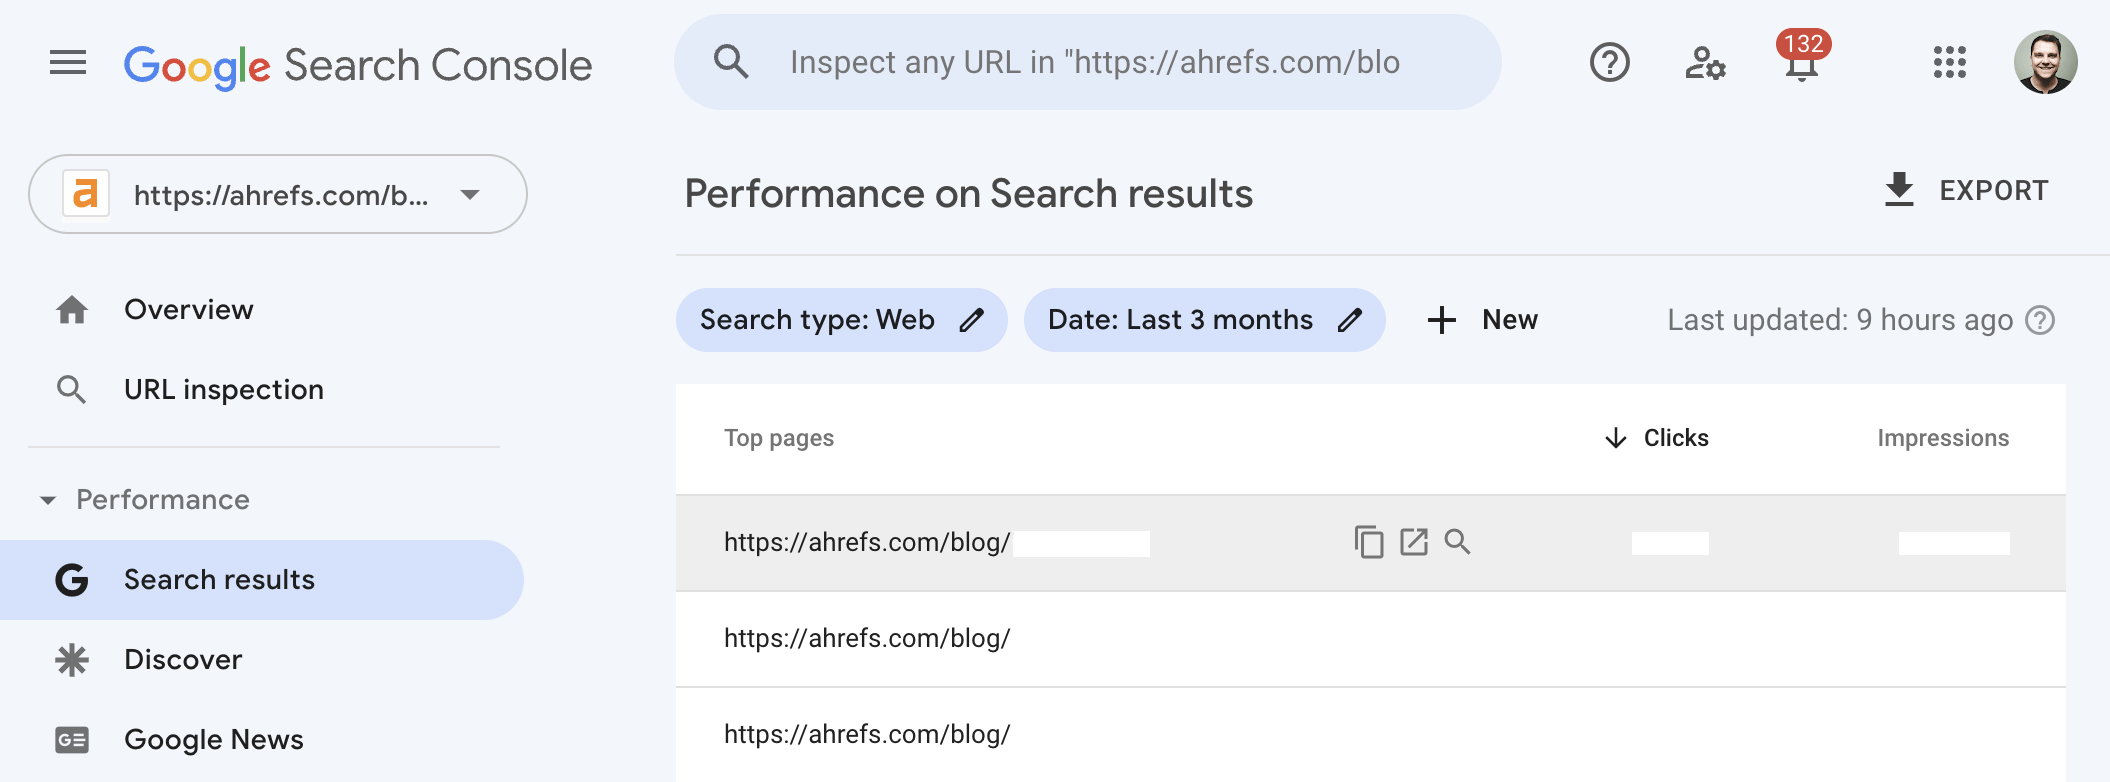 How to find top pages in Google Search Console